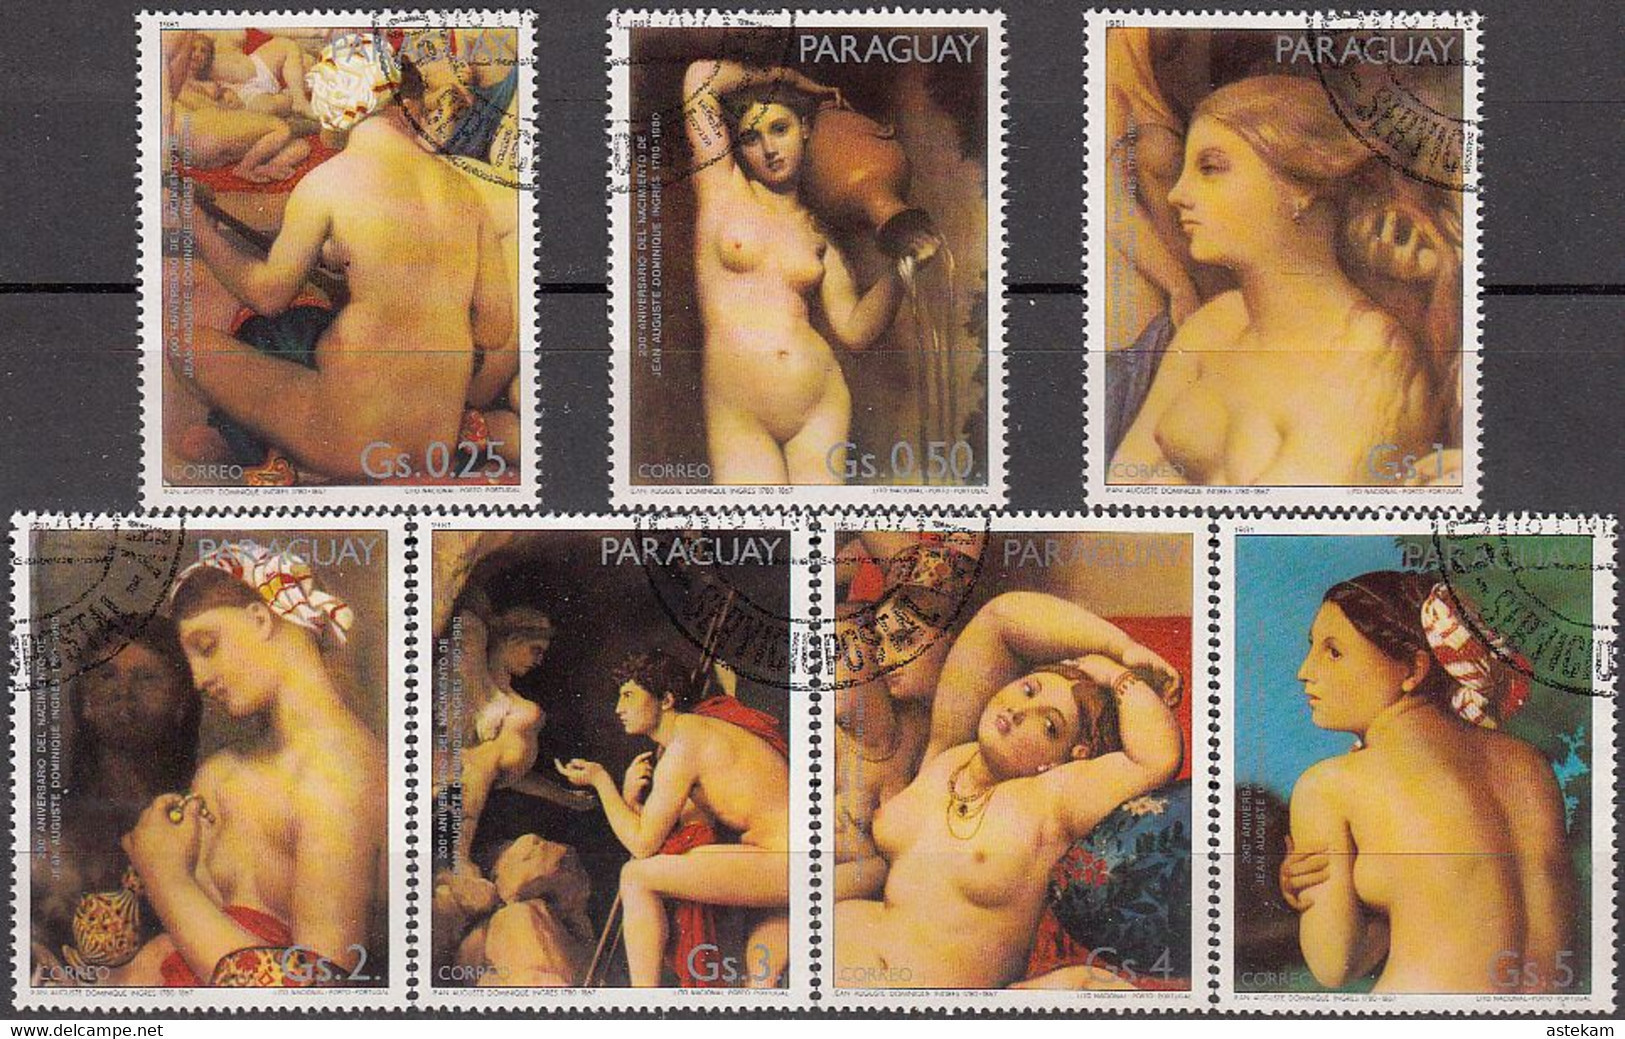 PARAGUAY 1981, ART, PAINTINGS OF NAKED WOMEN, COMPLETE USED SERIES With GOOD QUALITY - Paraguay